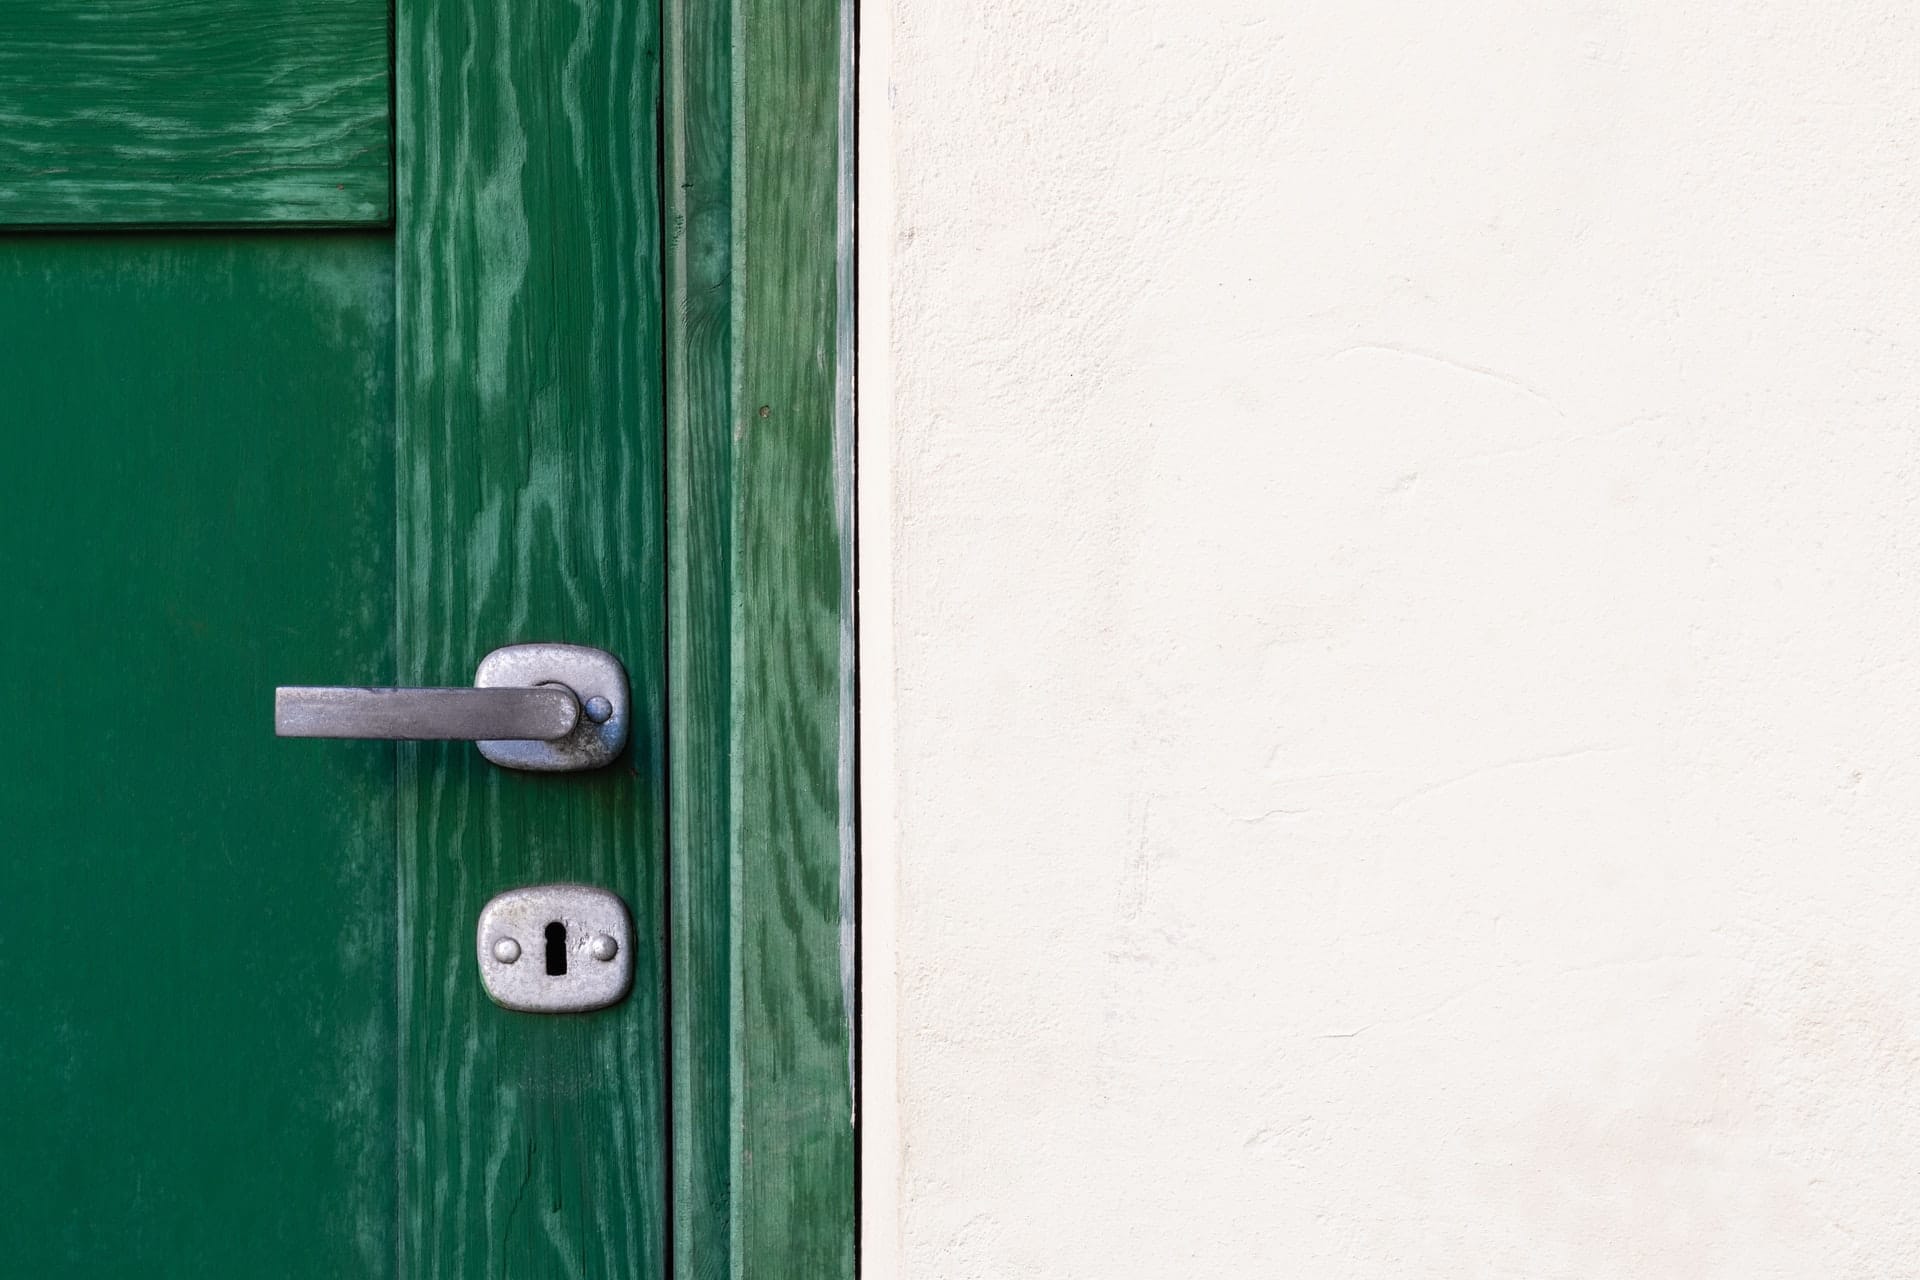 A door handle on a green door set against a white wall.